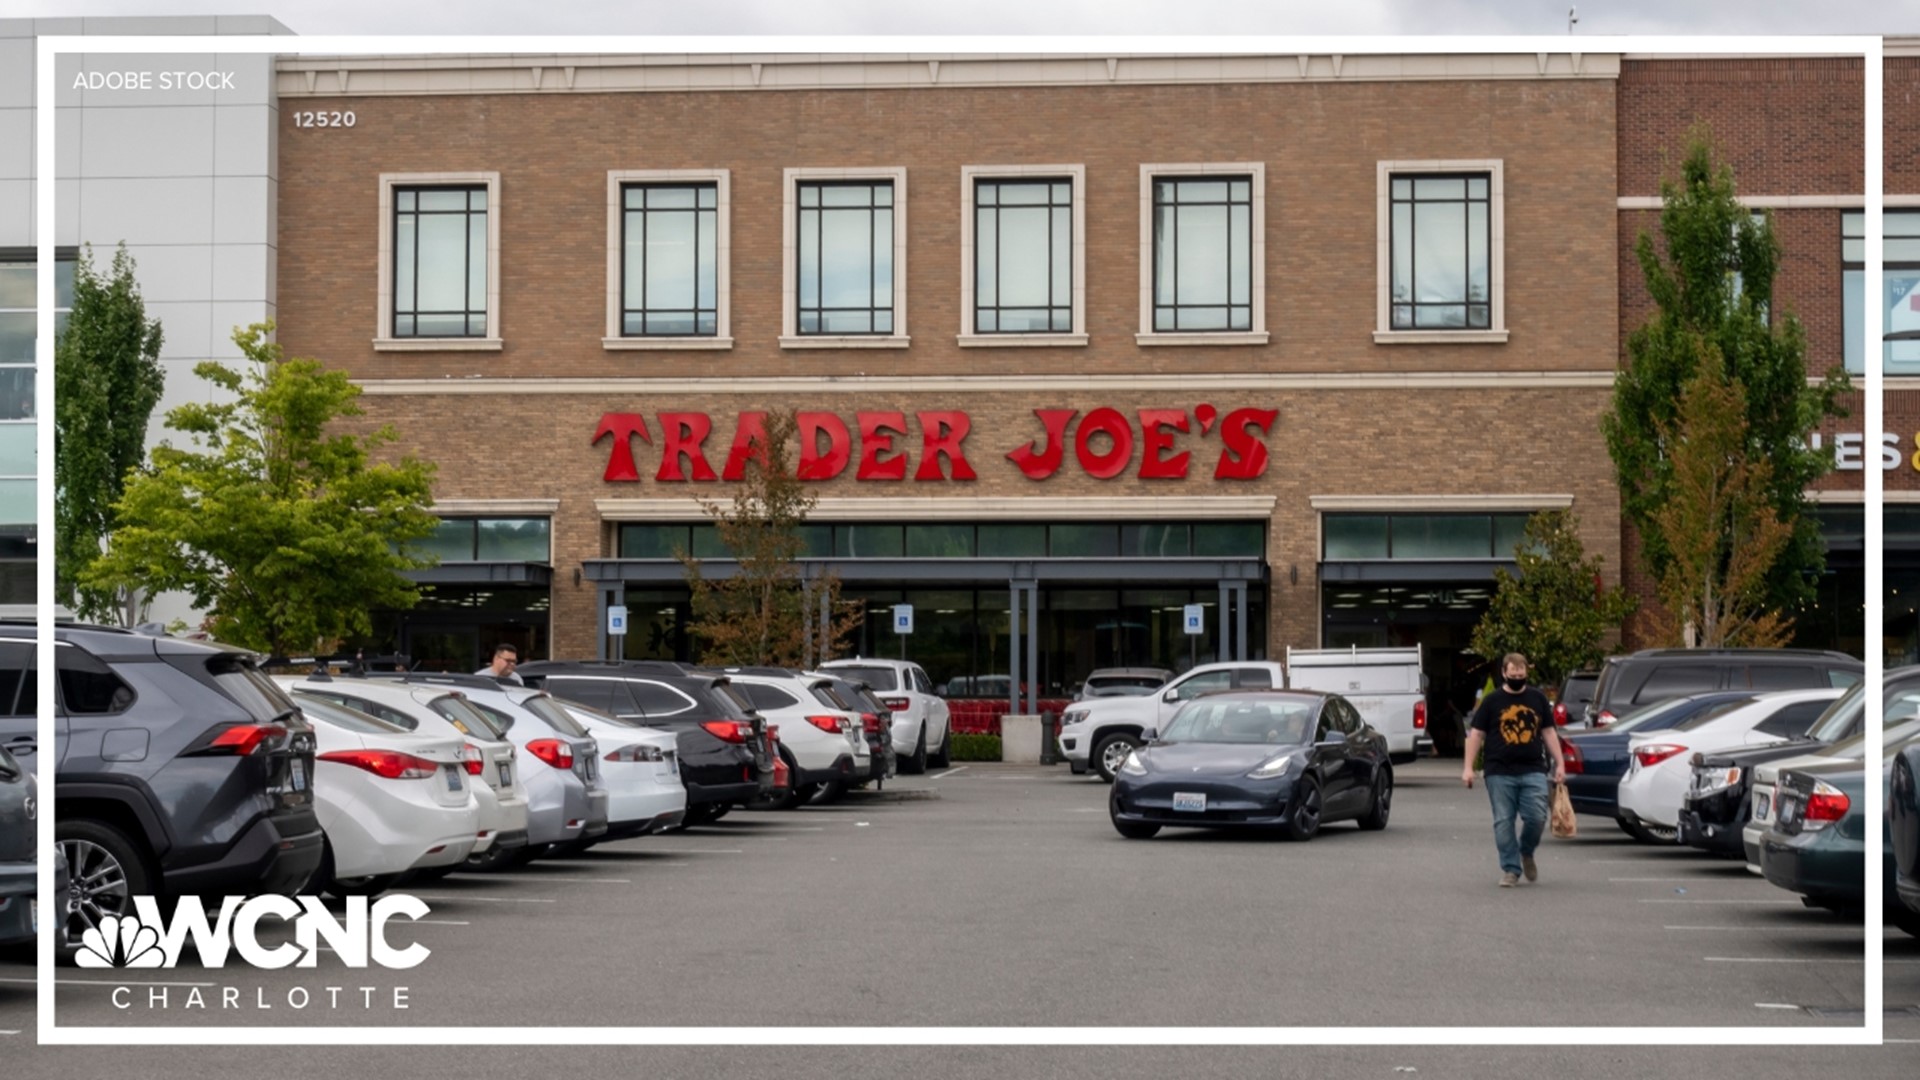 Parking can be a problem at Trader Joes stores, and not just in Midtown.